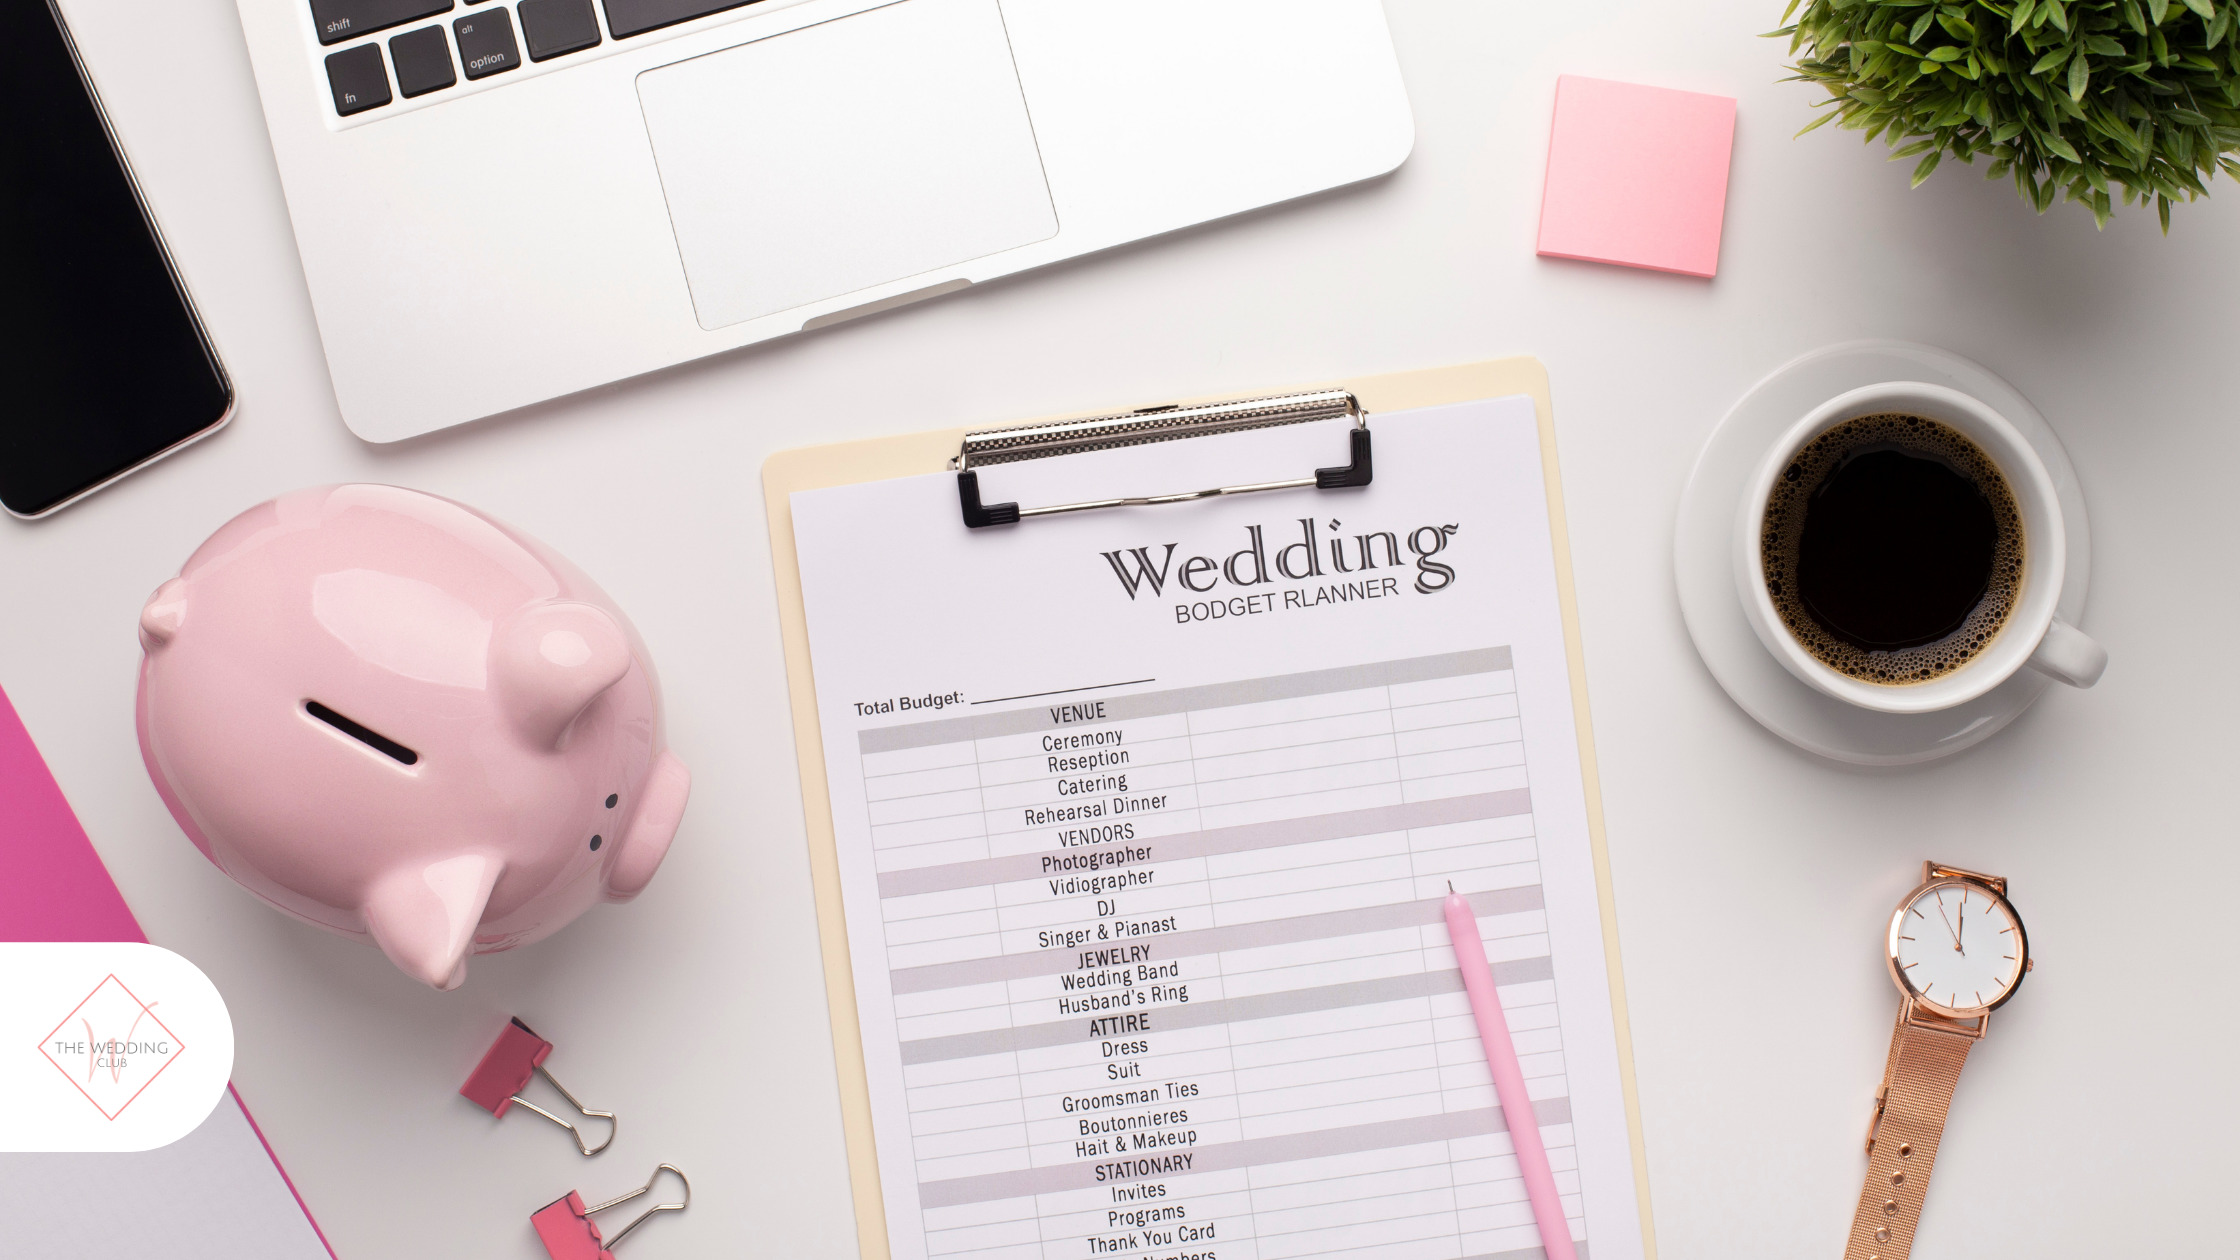 15 Wedding expenses that you forgot to budget for